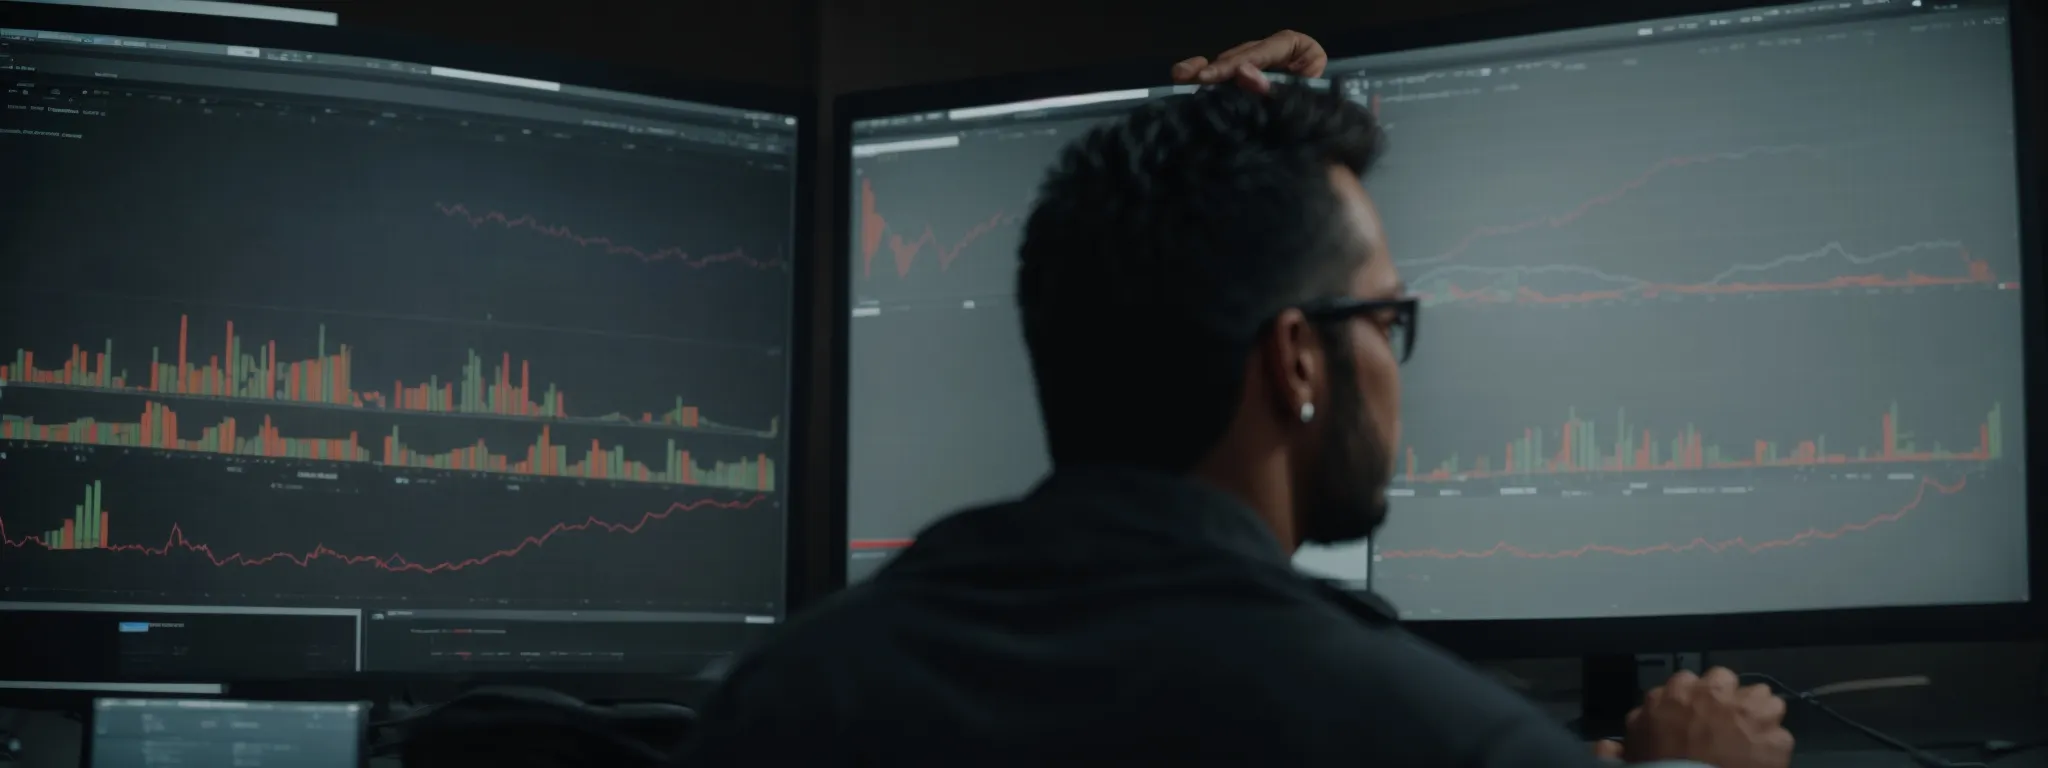 a focused individual analyzes a series of graphs and charts on a large monitor, reflecting a deep dive into seo performance metrics.